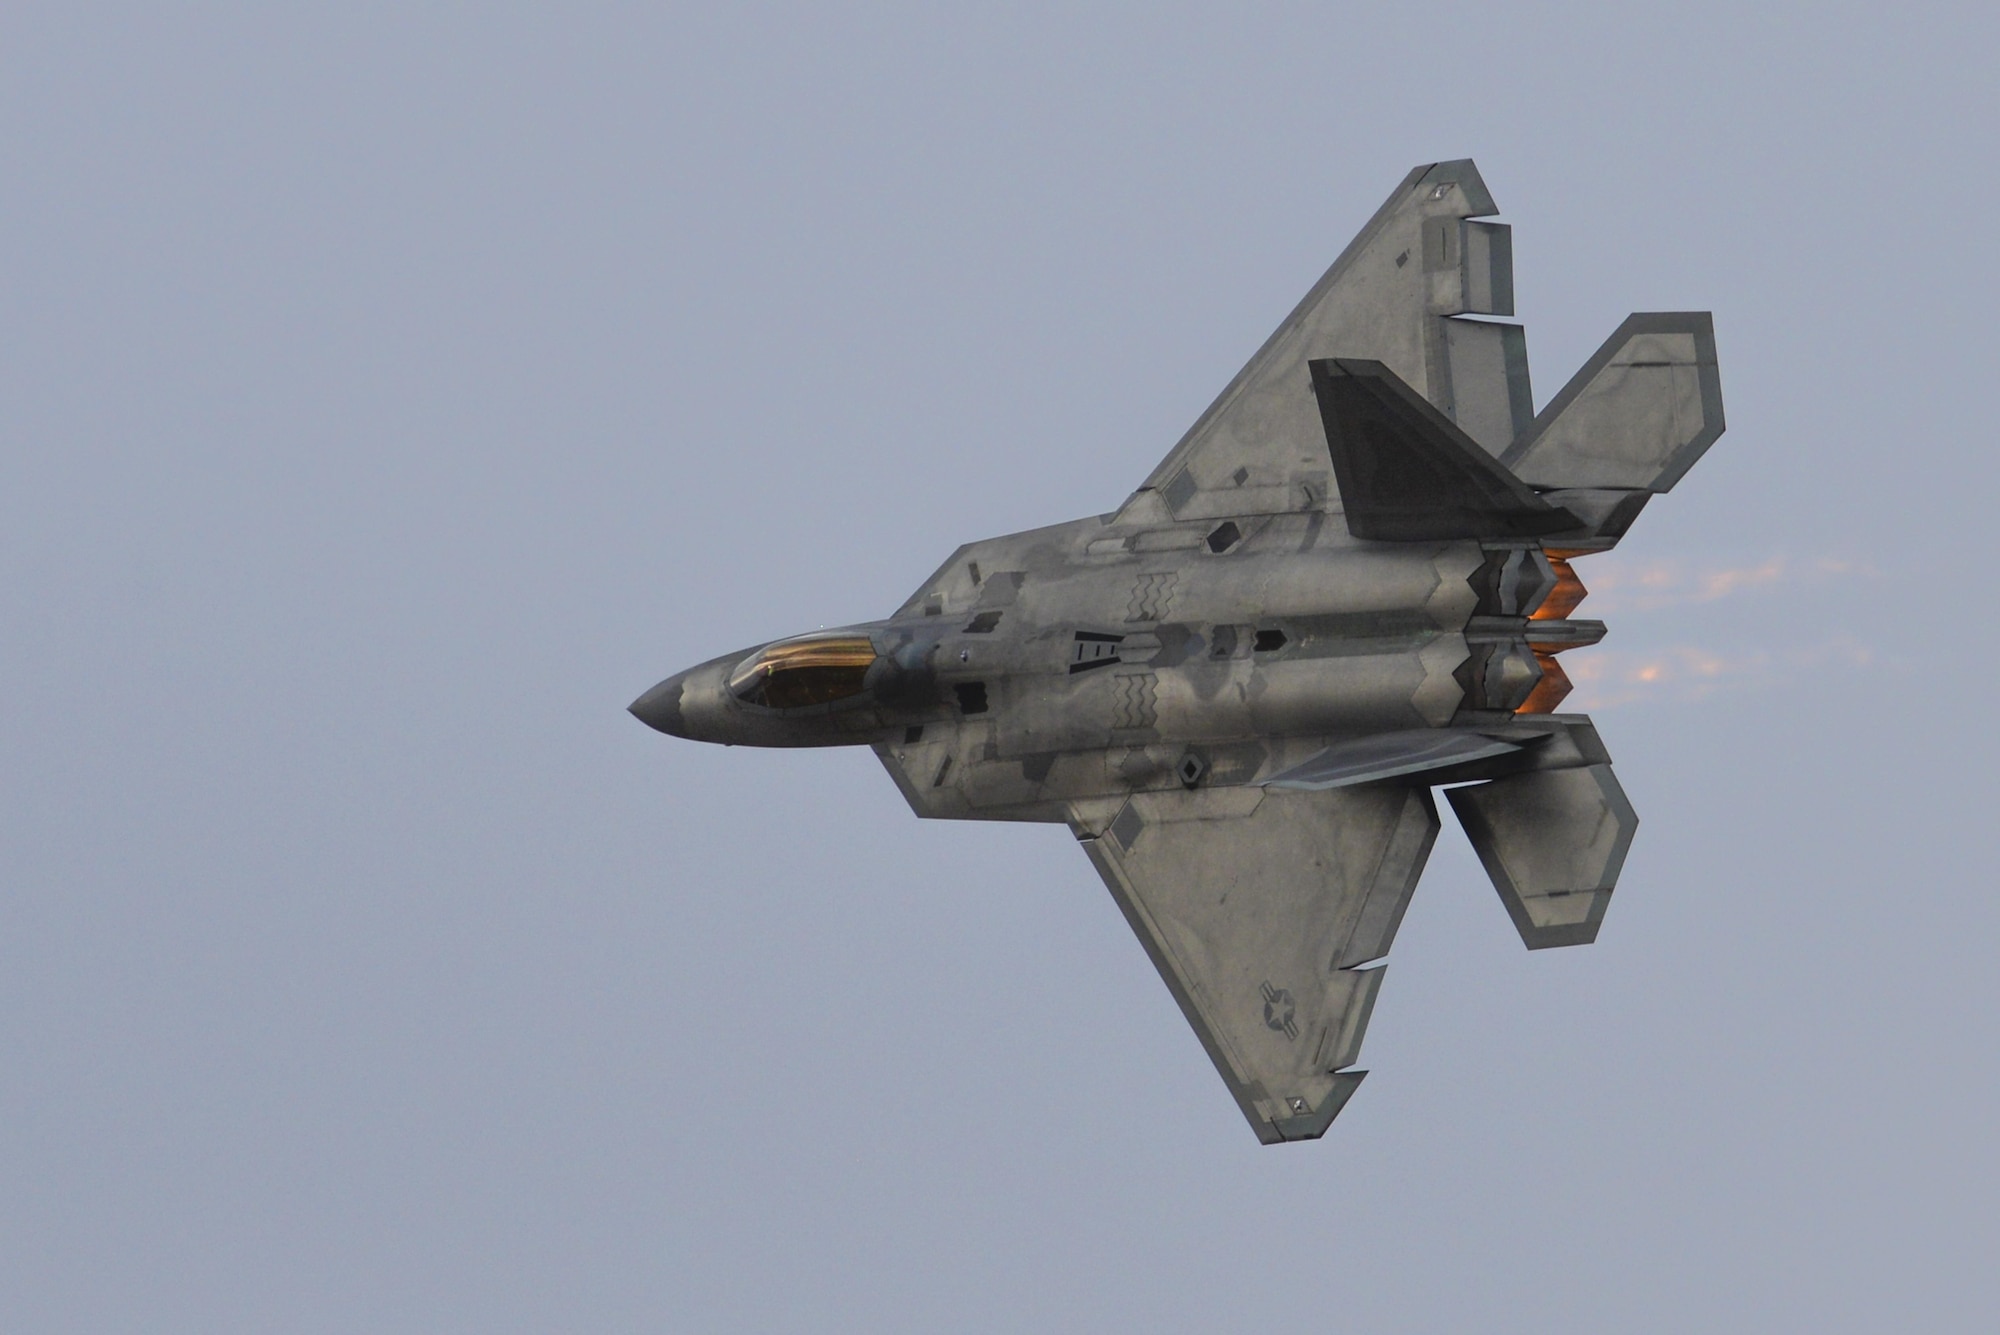 A U.S. Air Force F-22 Raptor performs an aerial maneuver during the 2016 Heritage Flight Training and Certification Course at Davis-Mothan Air Force Base, Ariz., March 5, 2016.  The annual aerial demonstration training event has been held at D-M since 2001, and the course featured aerial demonstrations from historical and modern fighter aircraft. (U.S. Air Force photo by Senior Airman Chris Massey/Released)